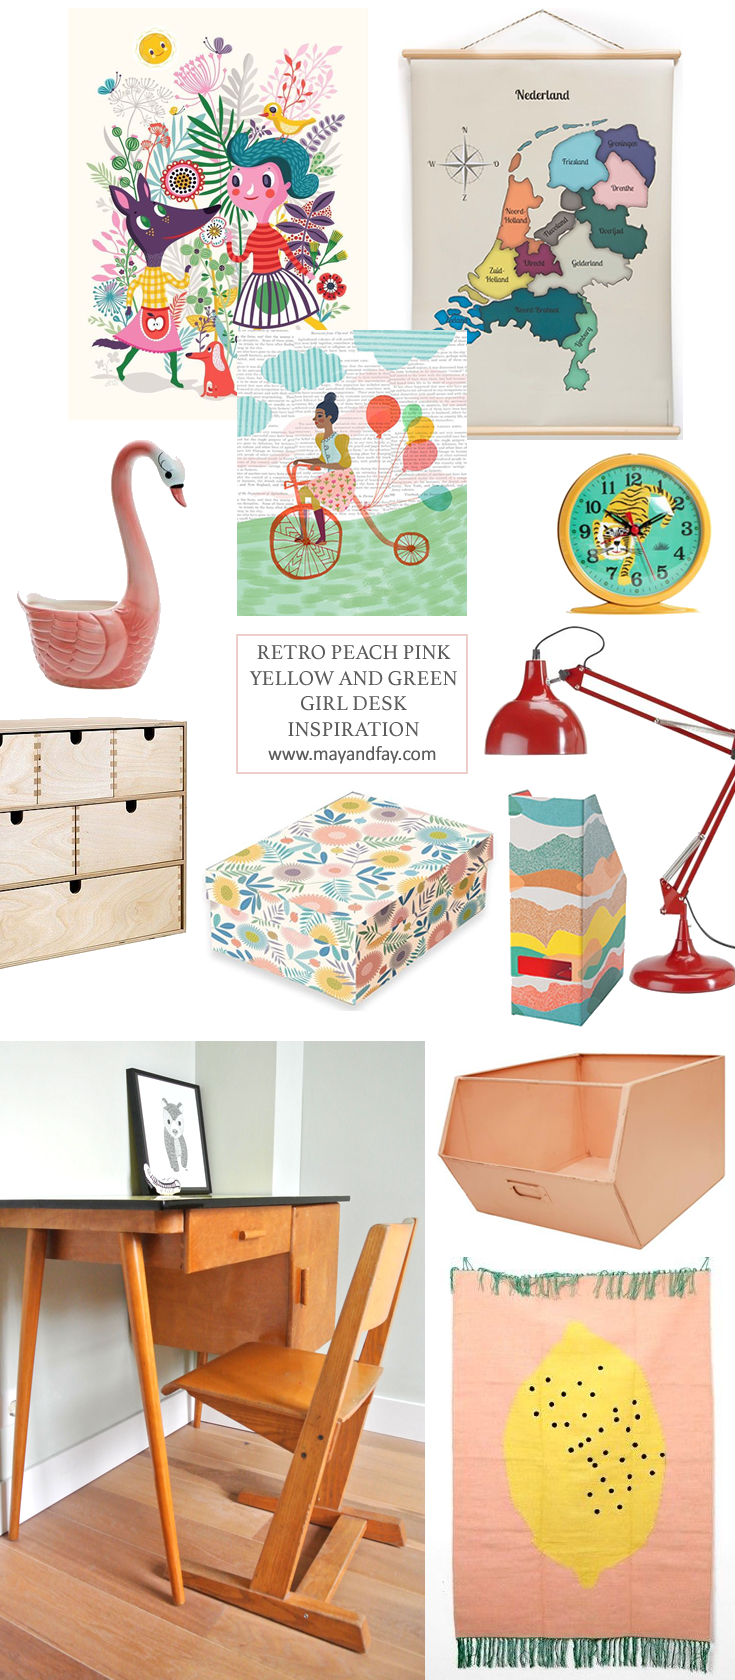 may and fay blog: retro pink, peach, yellow and green girl desk